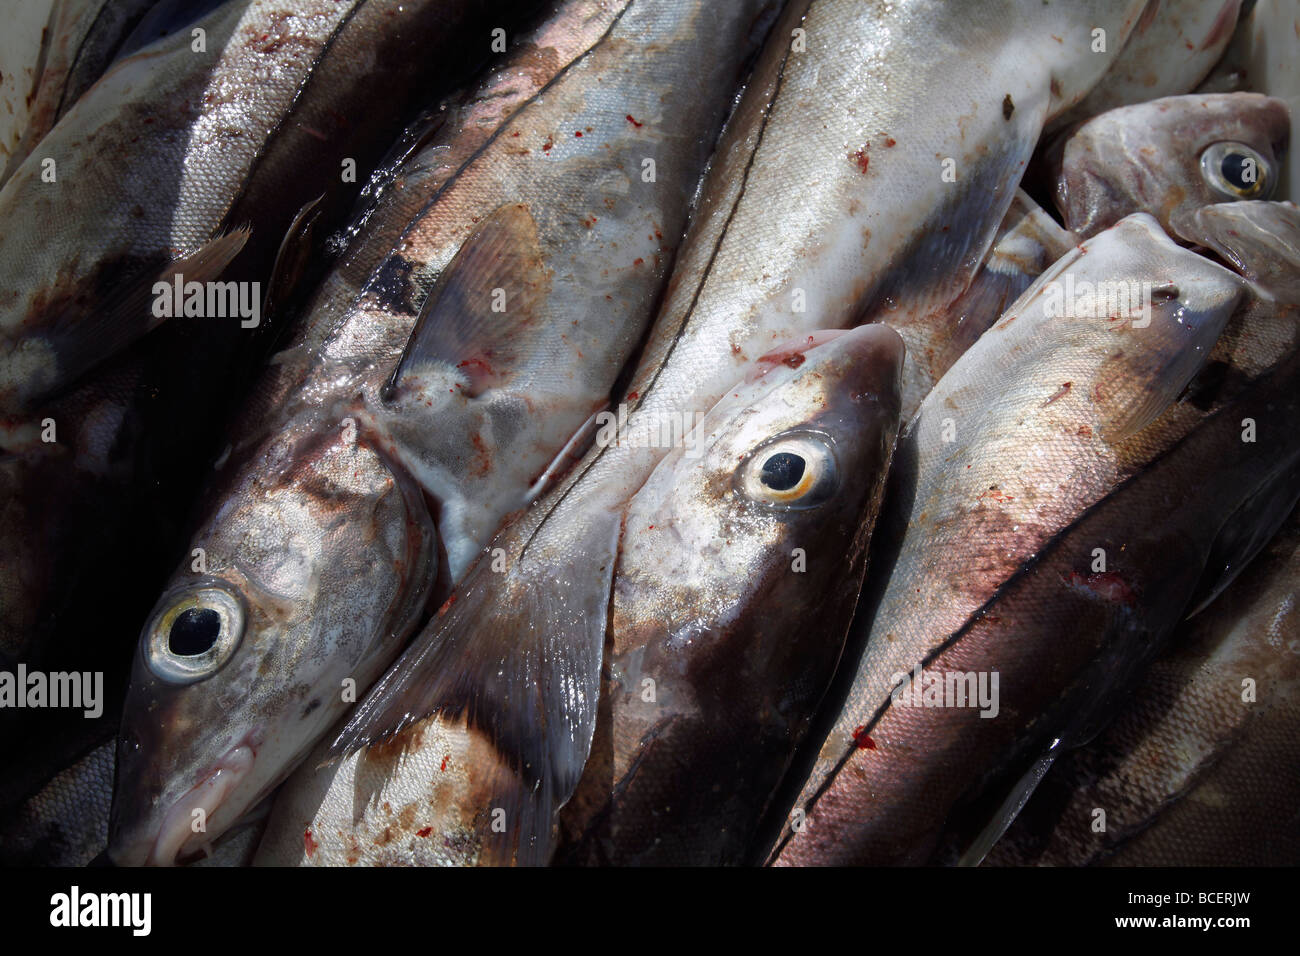 Cod fish off a boat in Iceland. Stock Photo